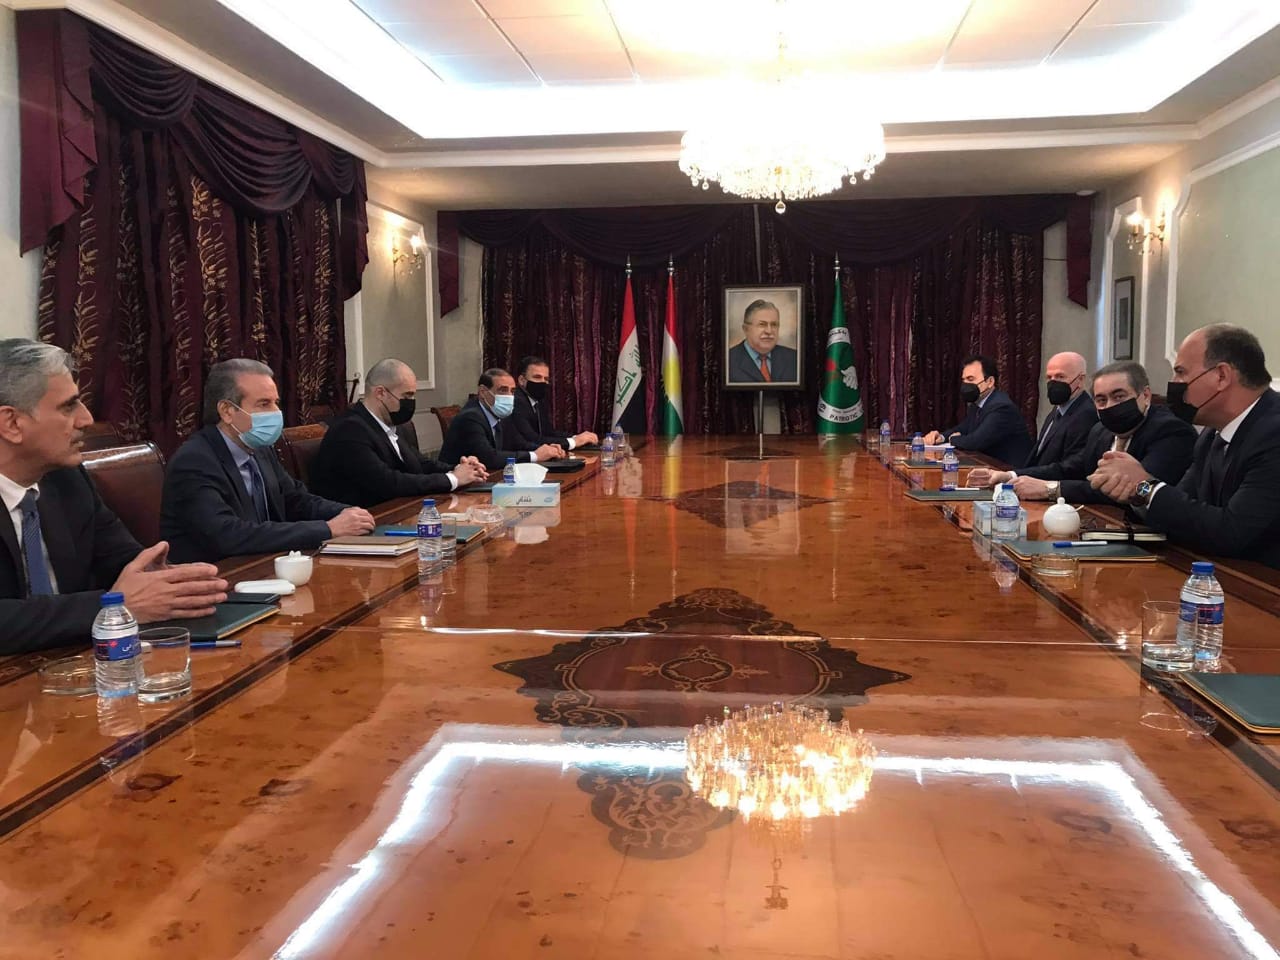 The three main Kurdish parties to meet and discuss Iraq's general budget for 2021